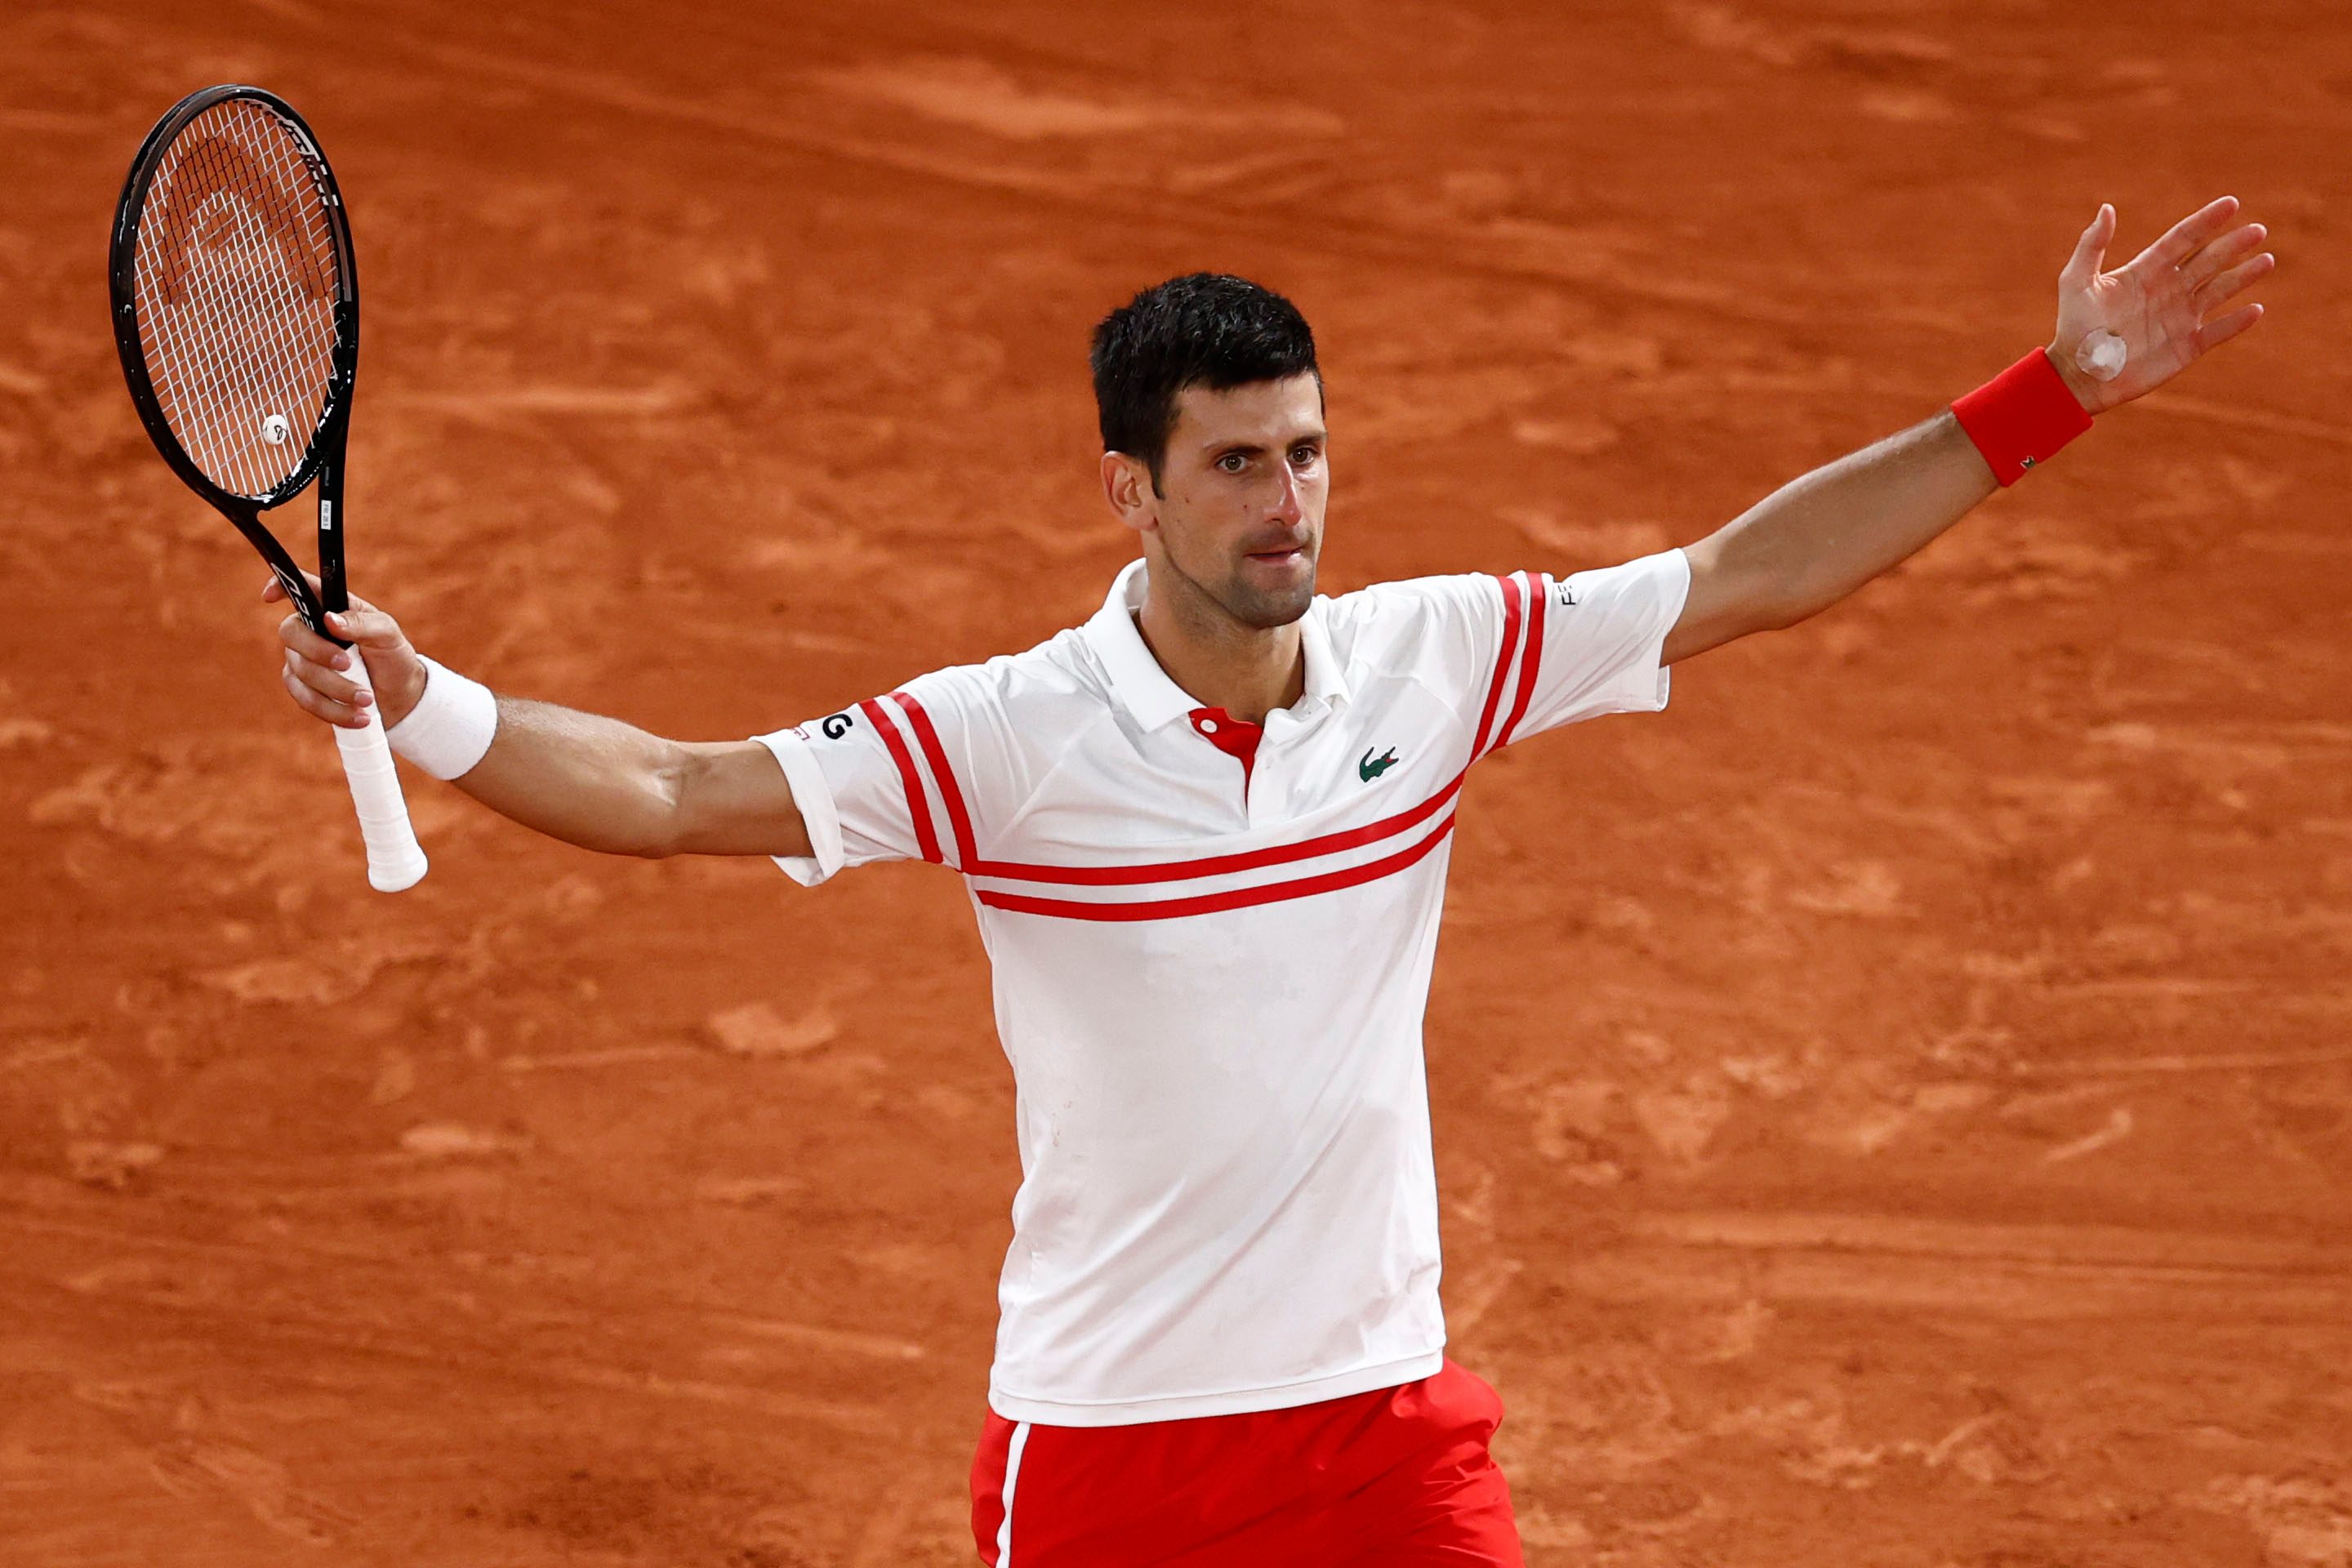 Djokovic topples Nadal in French Open match to remember forever